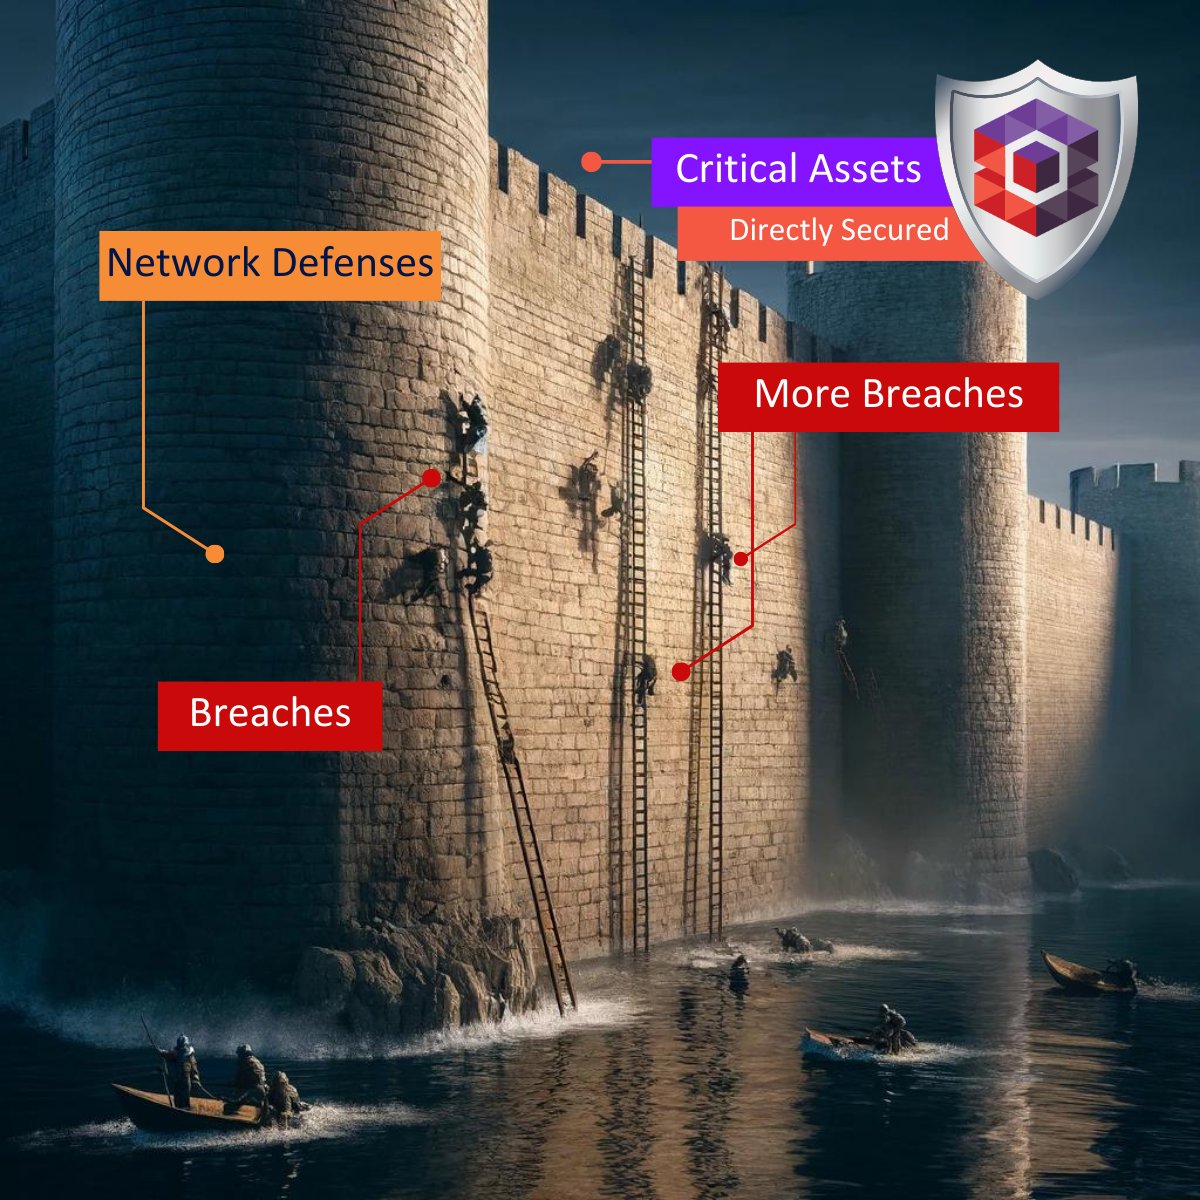 Moats deter, but invaders might breach. Sotero, your impenetrable defense, acts as armored knights for your data—your most valuable treasure. Secure against all breaches.

bit.ly/49vdmec
#ransomwaresolution #ransomwareprevention